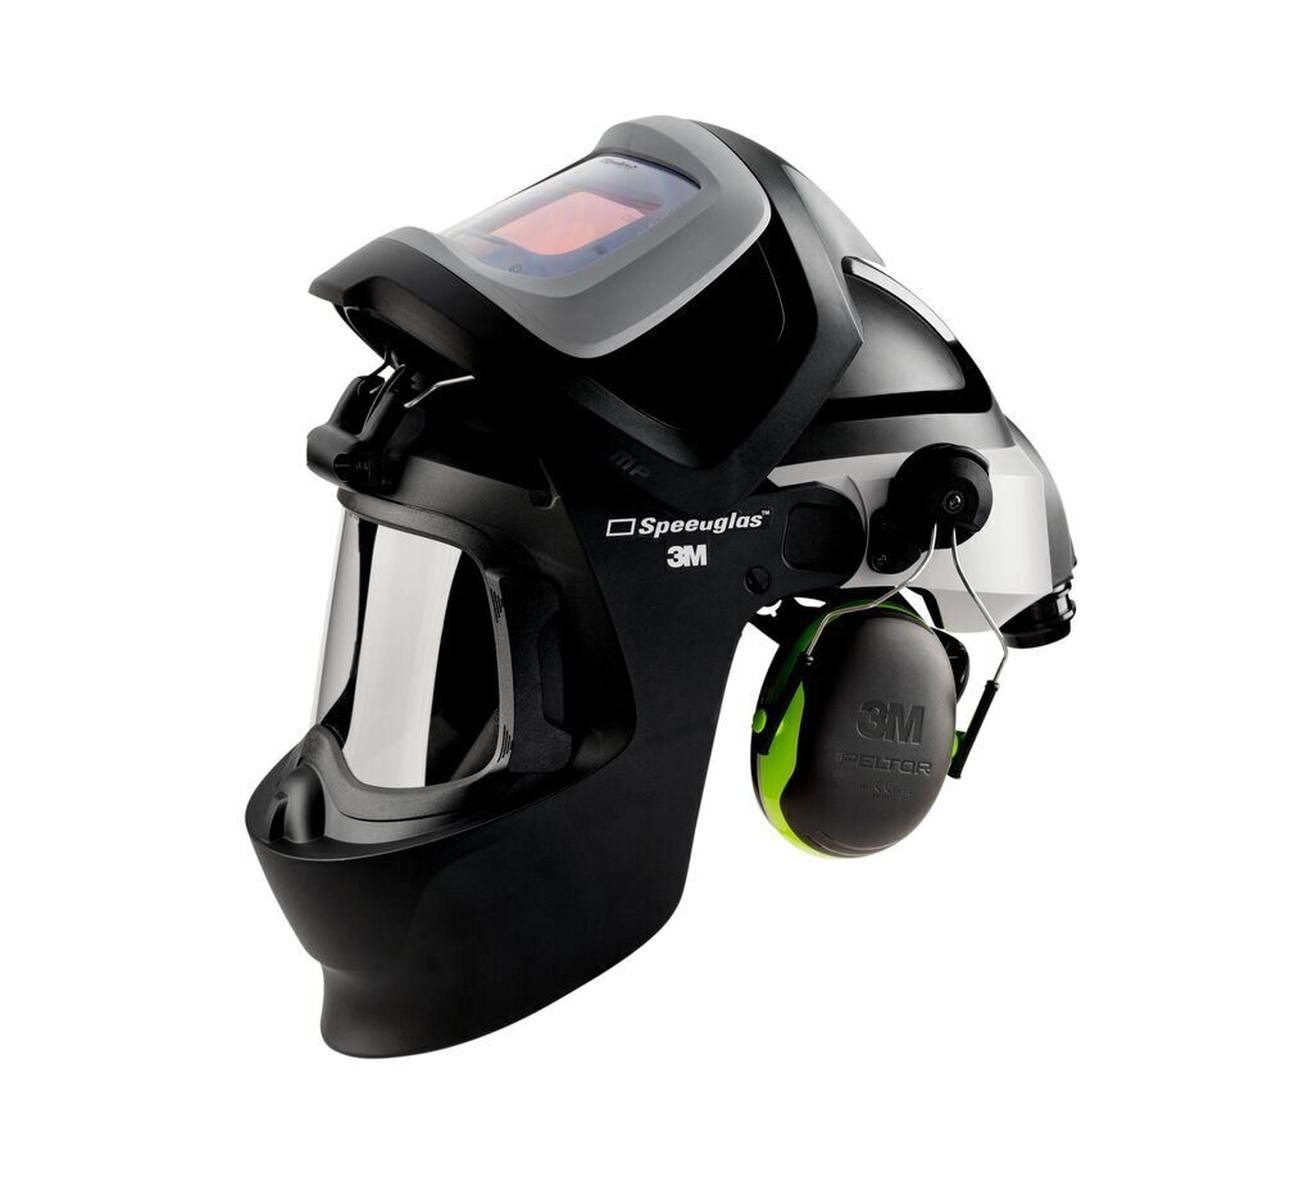 3M Speedglas 9100 MP welding mask without ADF, with Adflo blower respirator, QRS air hose, 5333506 adapter, air flow meter, pre-filter, spark arrester, particle filter, lithium-ion battery and charger incl. storage bag #577700